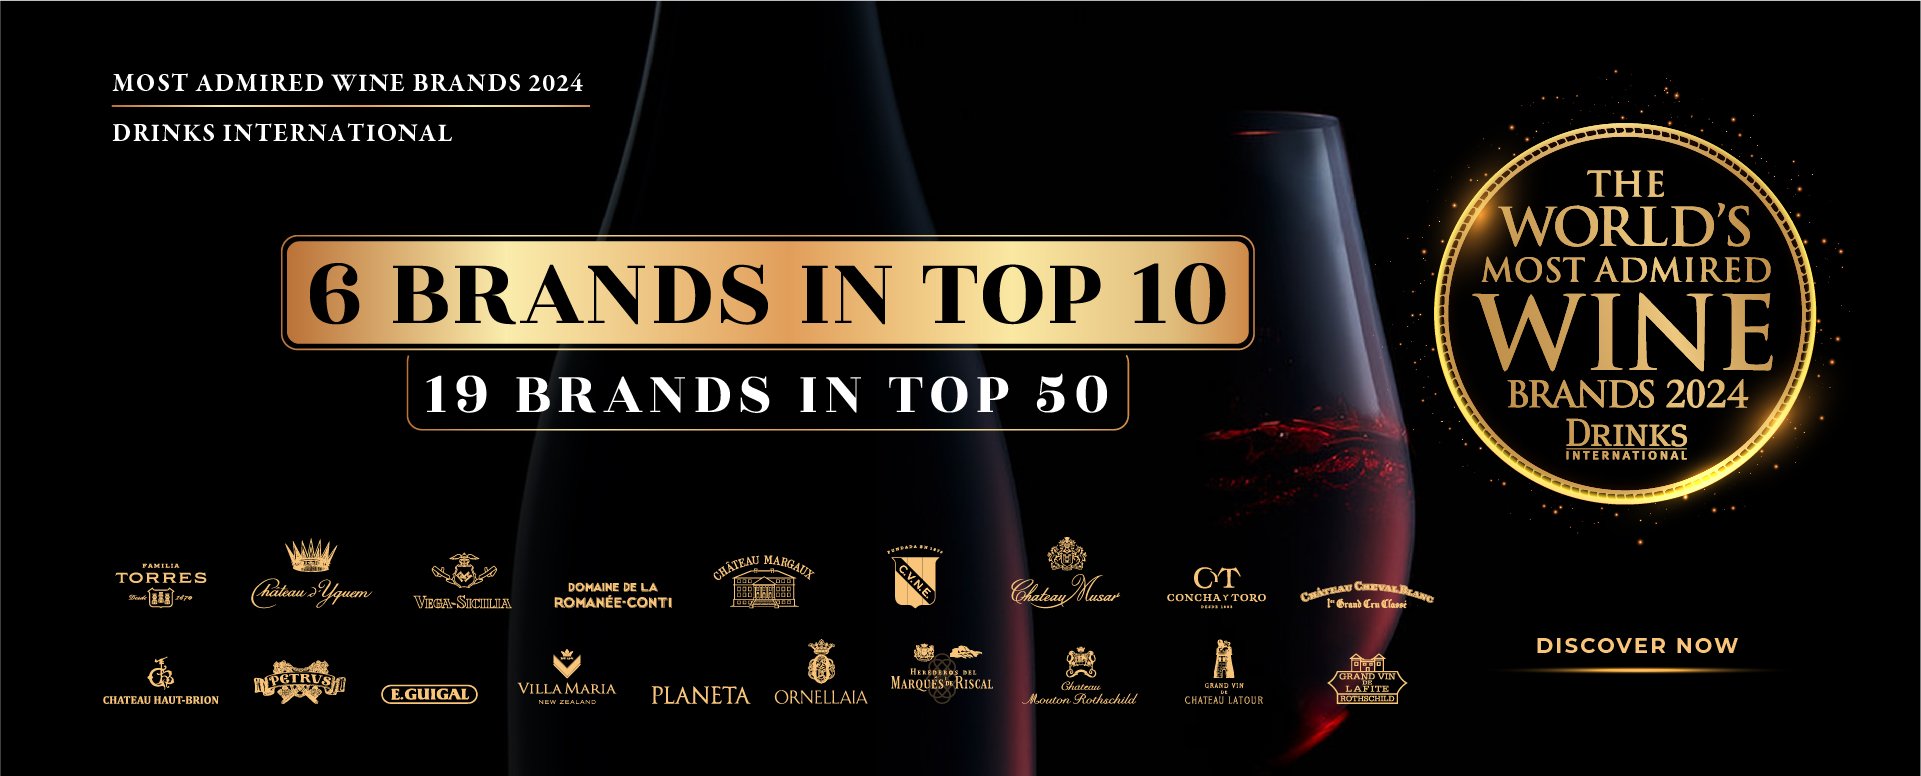 THE WORLD'S MOST ADMIRED WINE BRANDS 2024